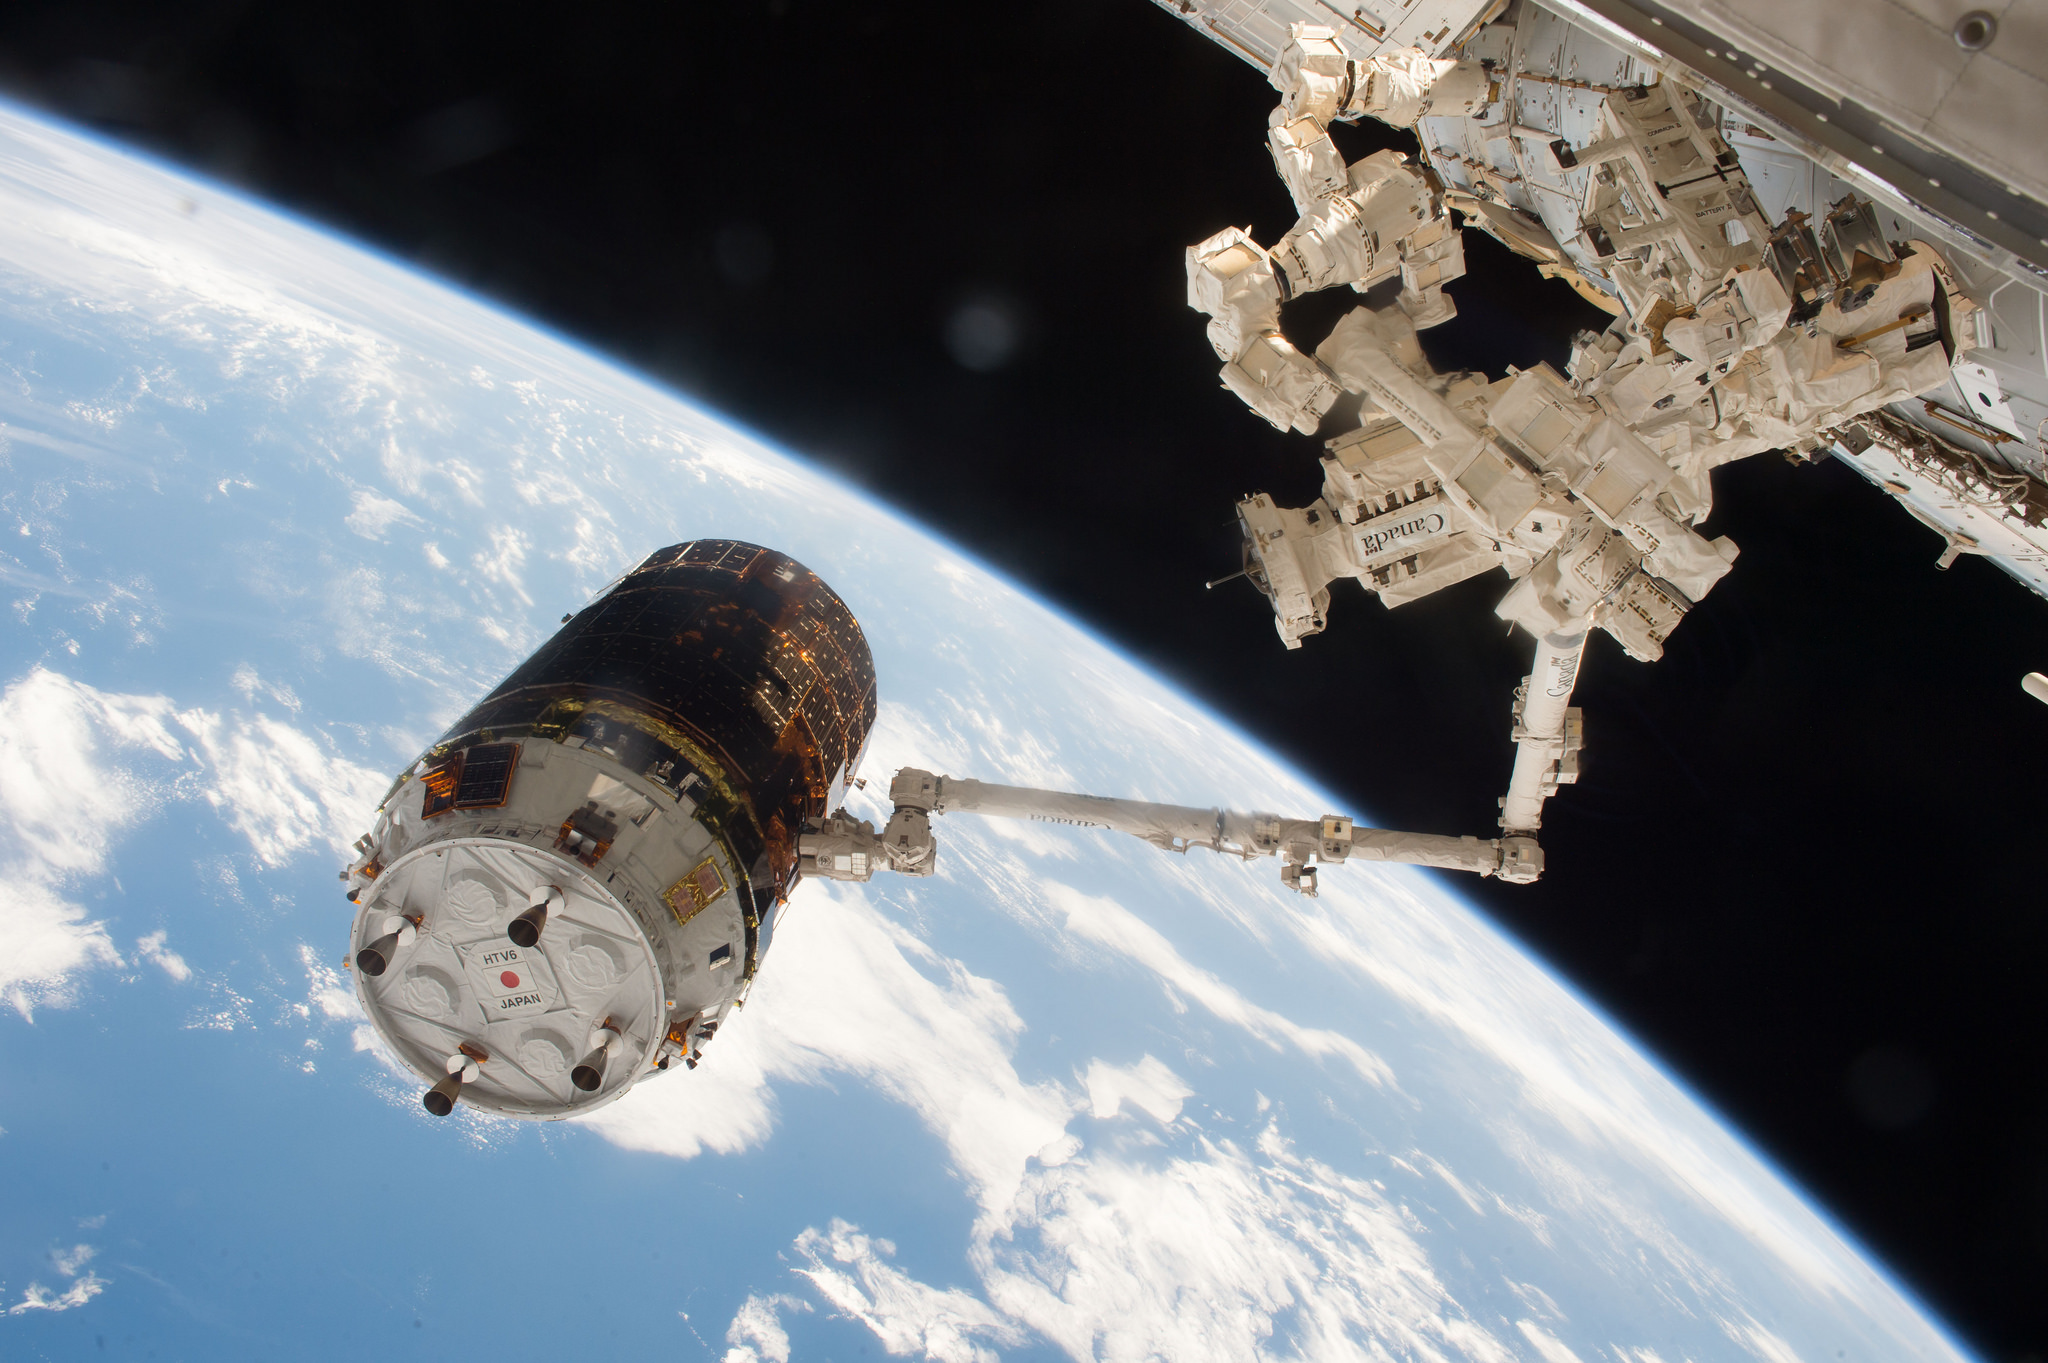 Japanese H-II Transport Vehicle-6 (HTV-6) cargo vehicle is seen grappled by the International Space Station robotic arm